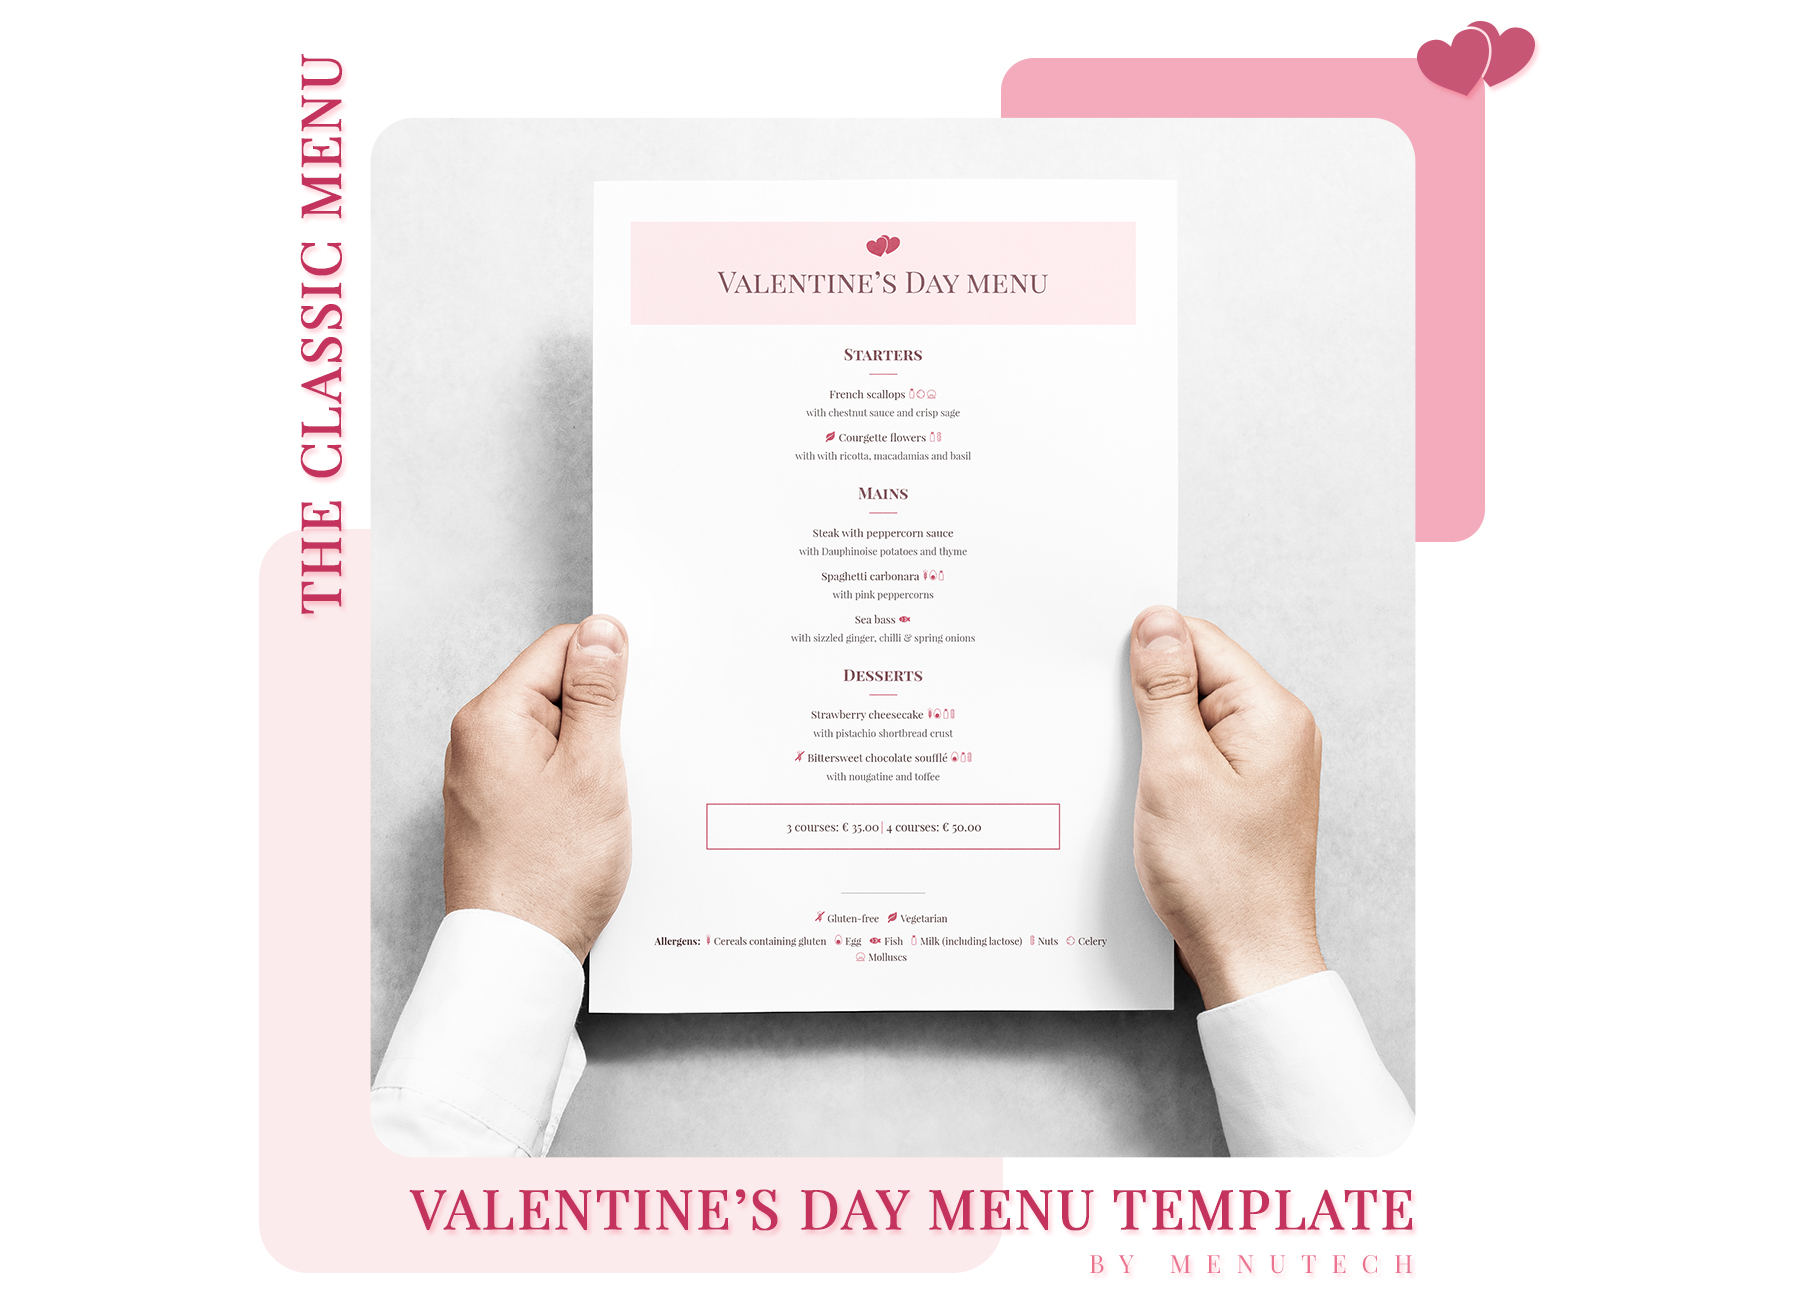 20 examples of menus with allergens for Valentine